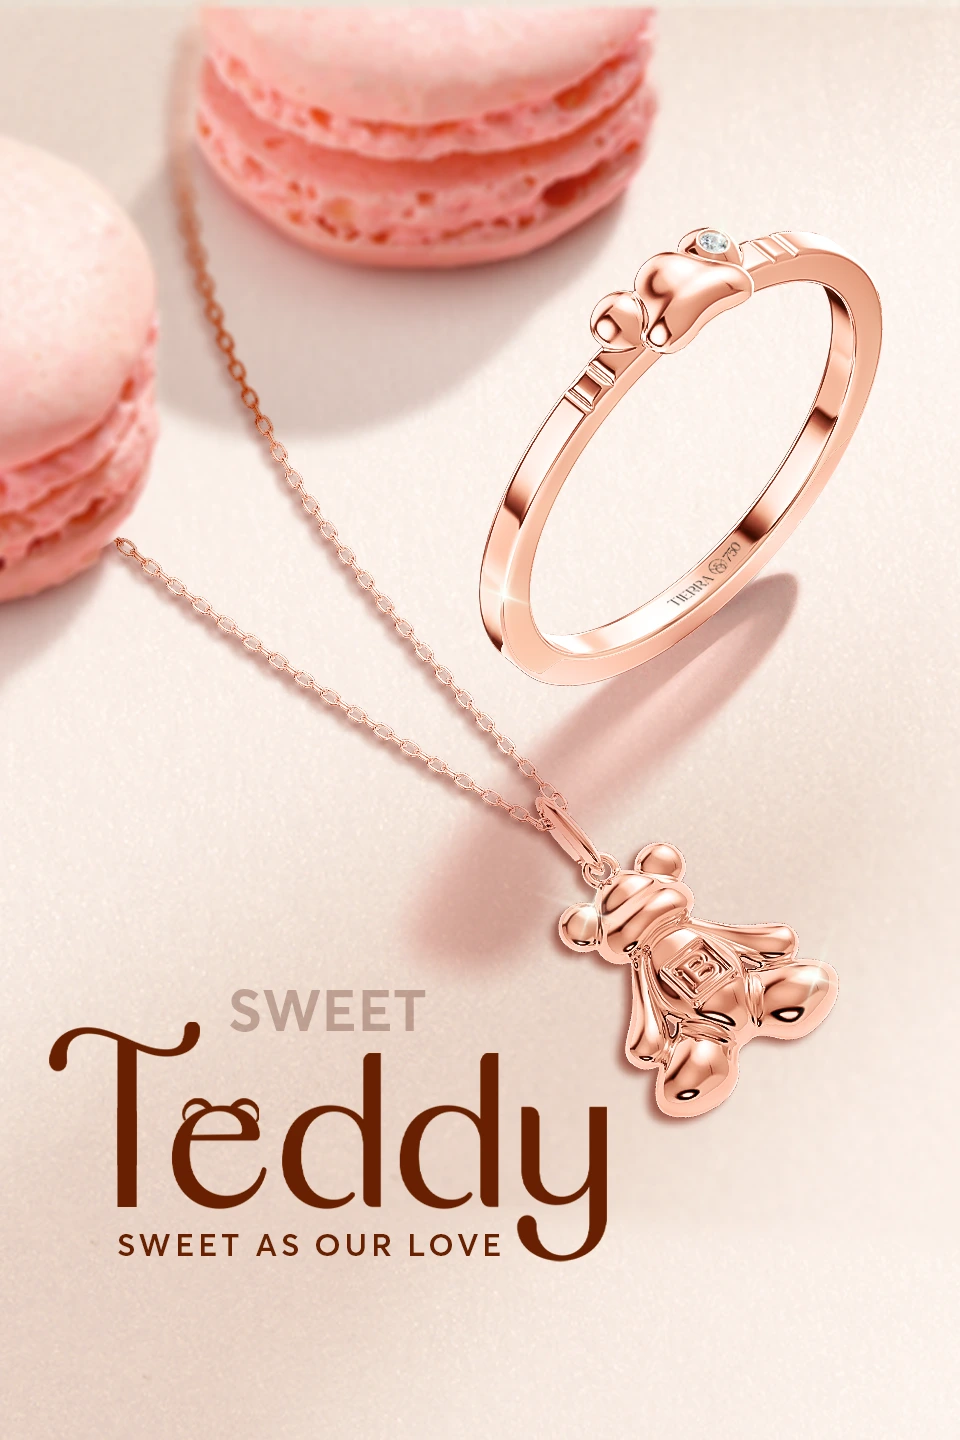 Bộ sưu tập Sweet Teddy - Sweet gift for your sparkling Valentine